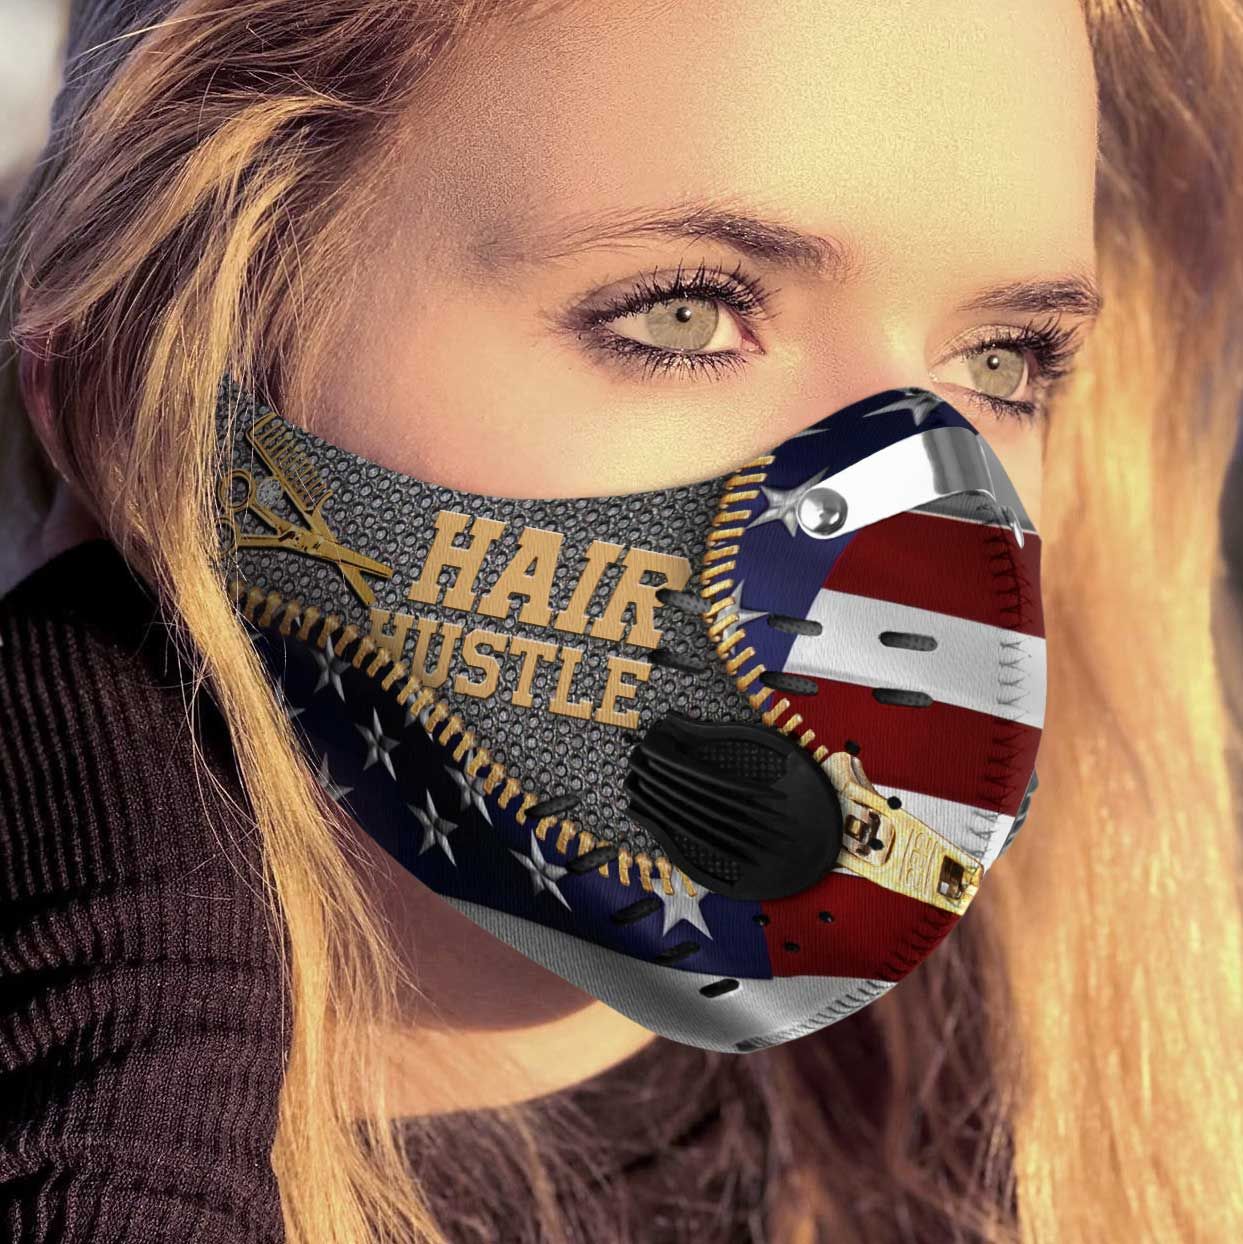 Hairstylist hair hustle american flag carbon pm 2.5 face mask